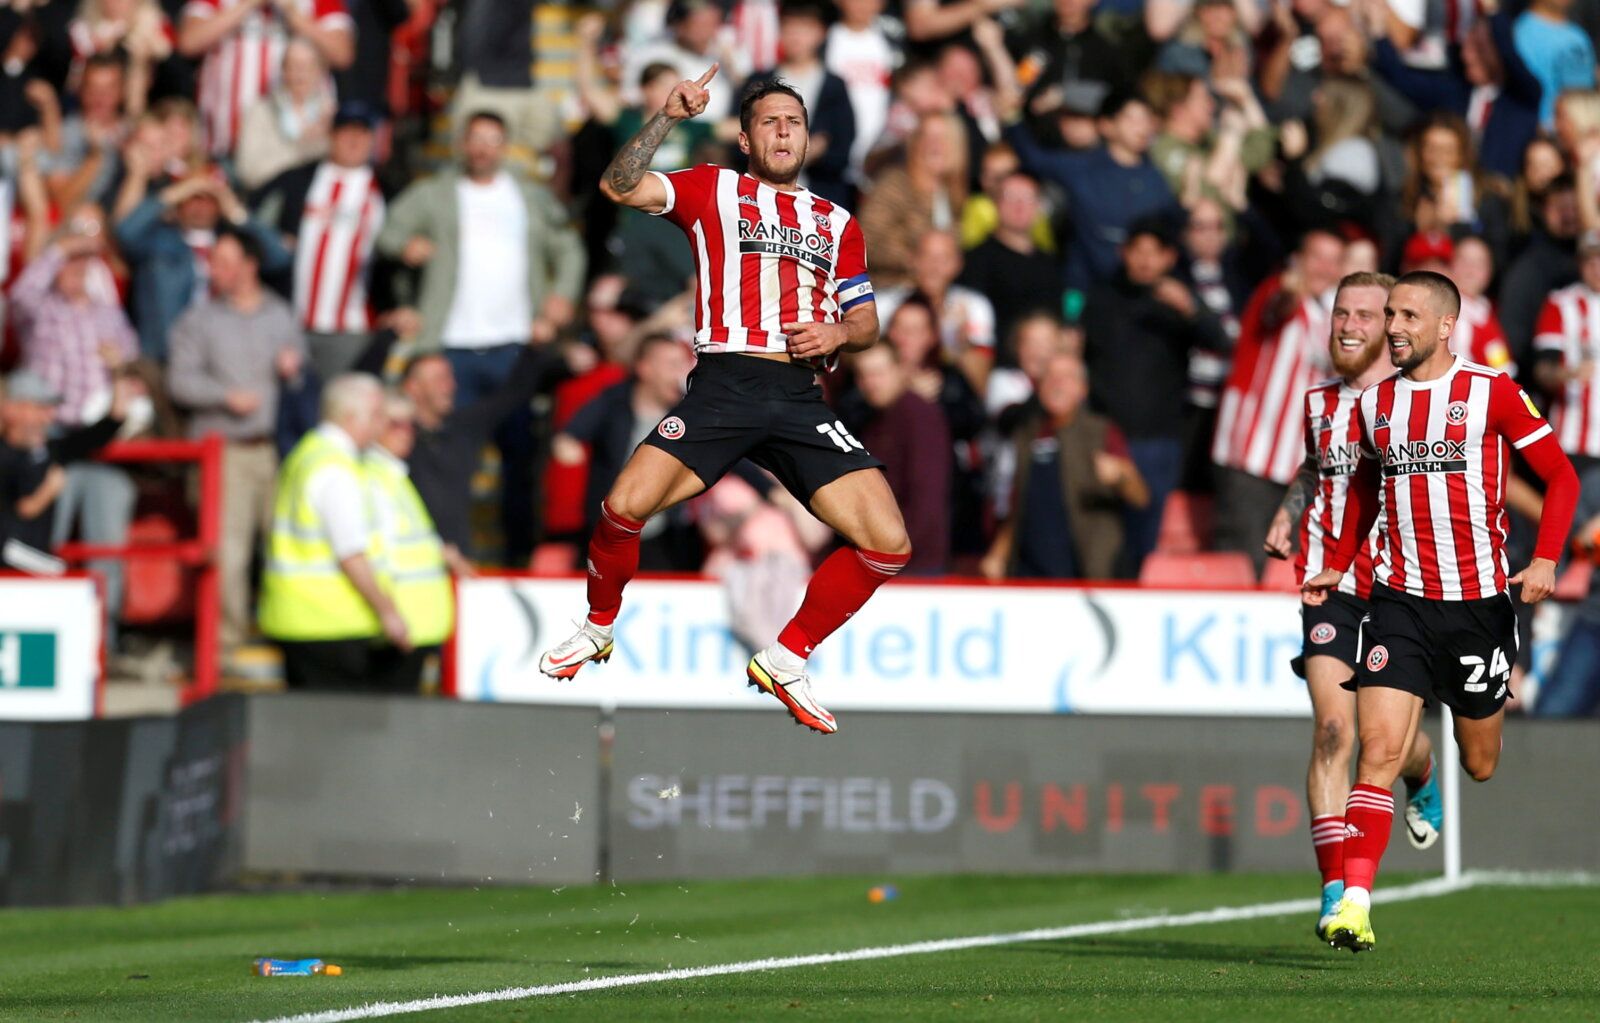 Soccer Football - Championship - Sheffield United v Derby County - Bramall Lane, Sheffield, Britain - September 25, 2021  Sheffield United's Billy Sharp celebrates scoring their first goal   Action Images/Ed Sykes  EDITORIAL USE ONLY. No use with unauthorized audio, video, data, fixture lists, club/league logos or 